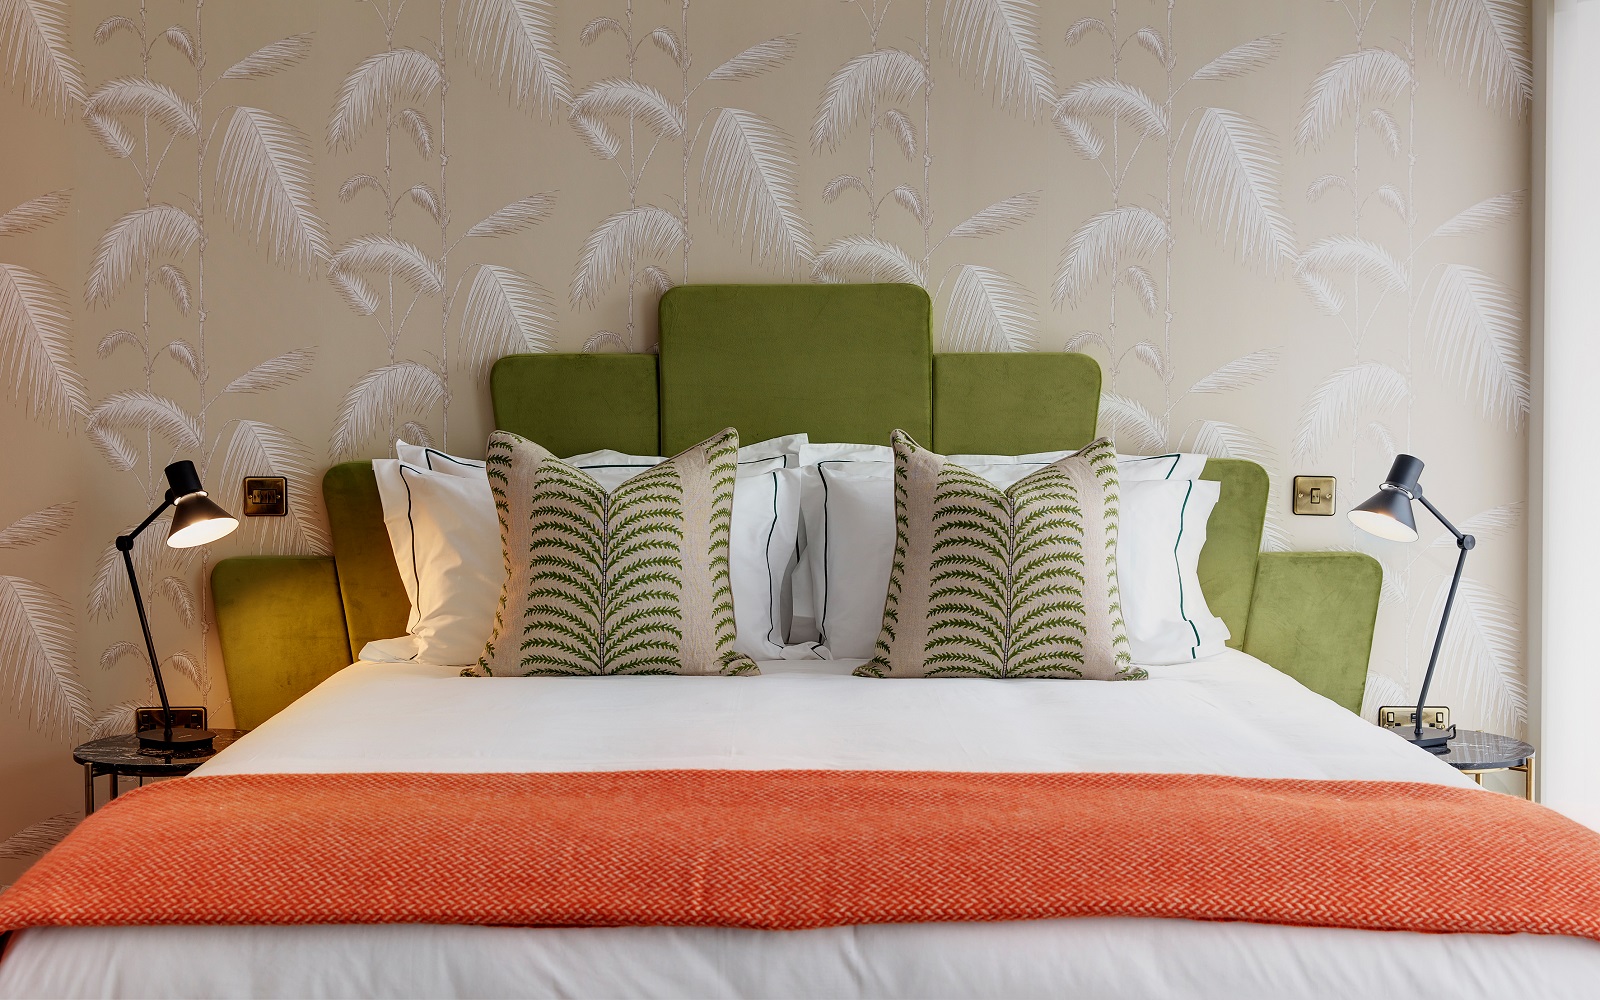 patterned wallpaper, green headboard, orange throw on the art deco style bed in the guestroom at Brama Bromley